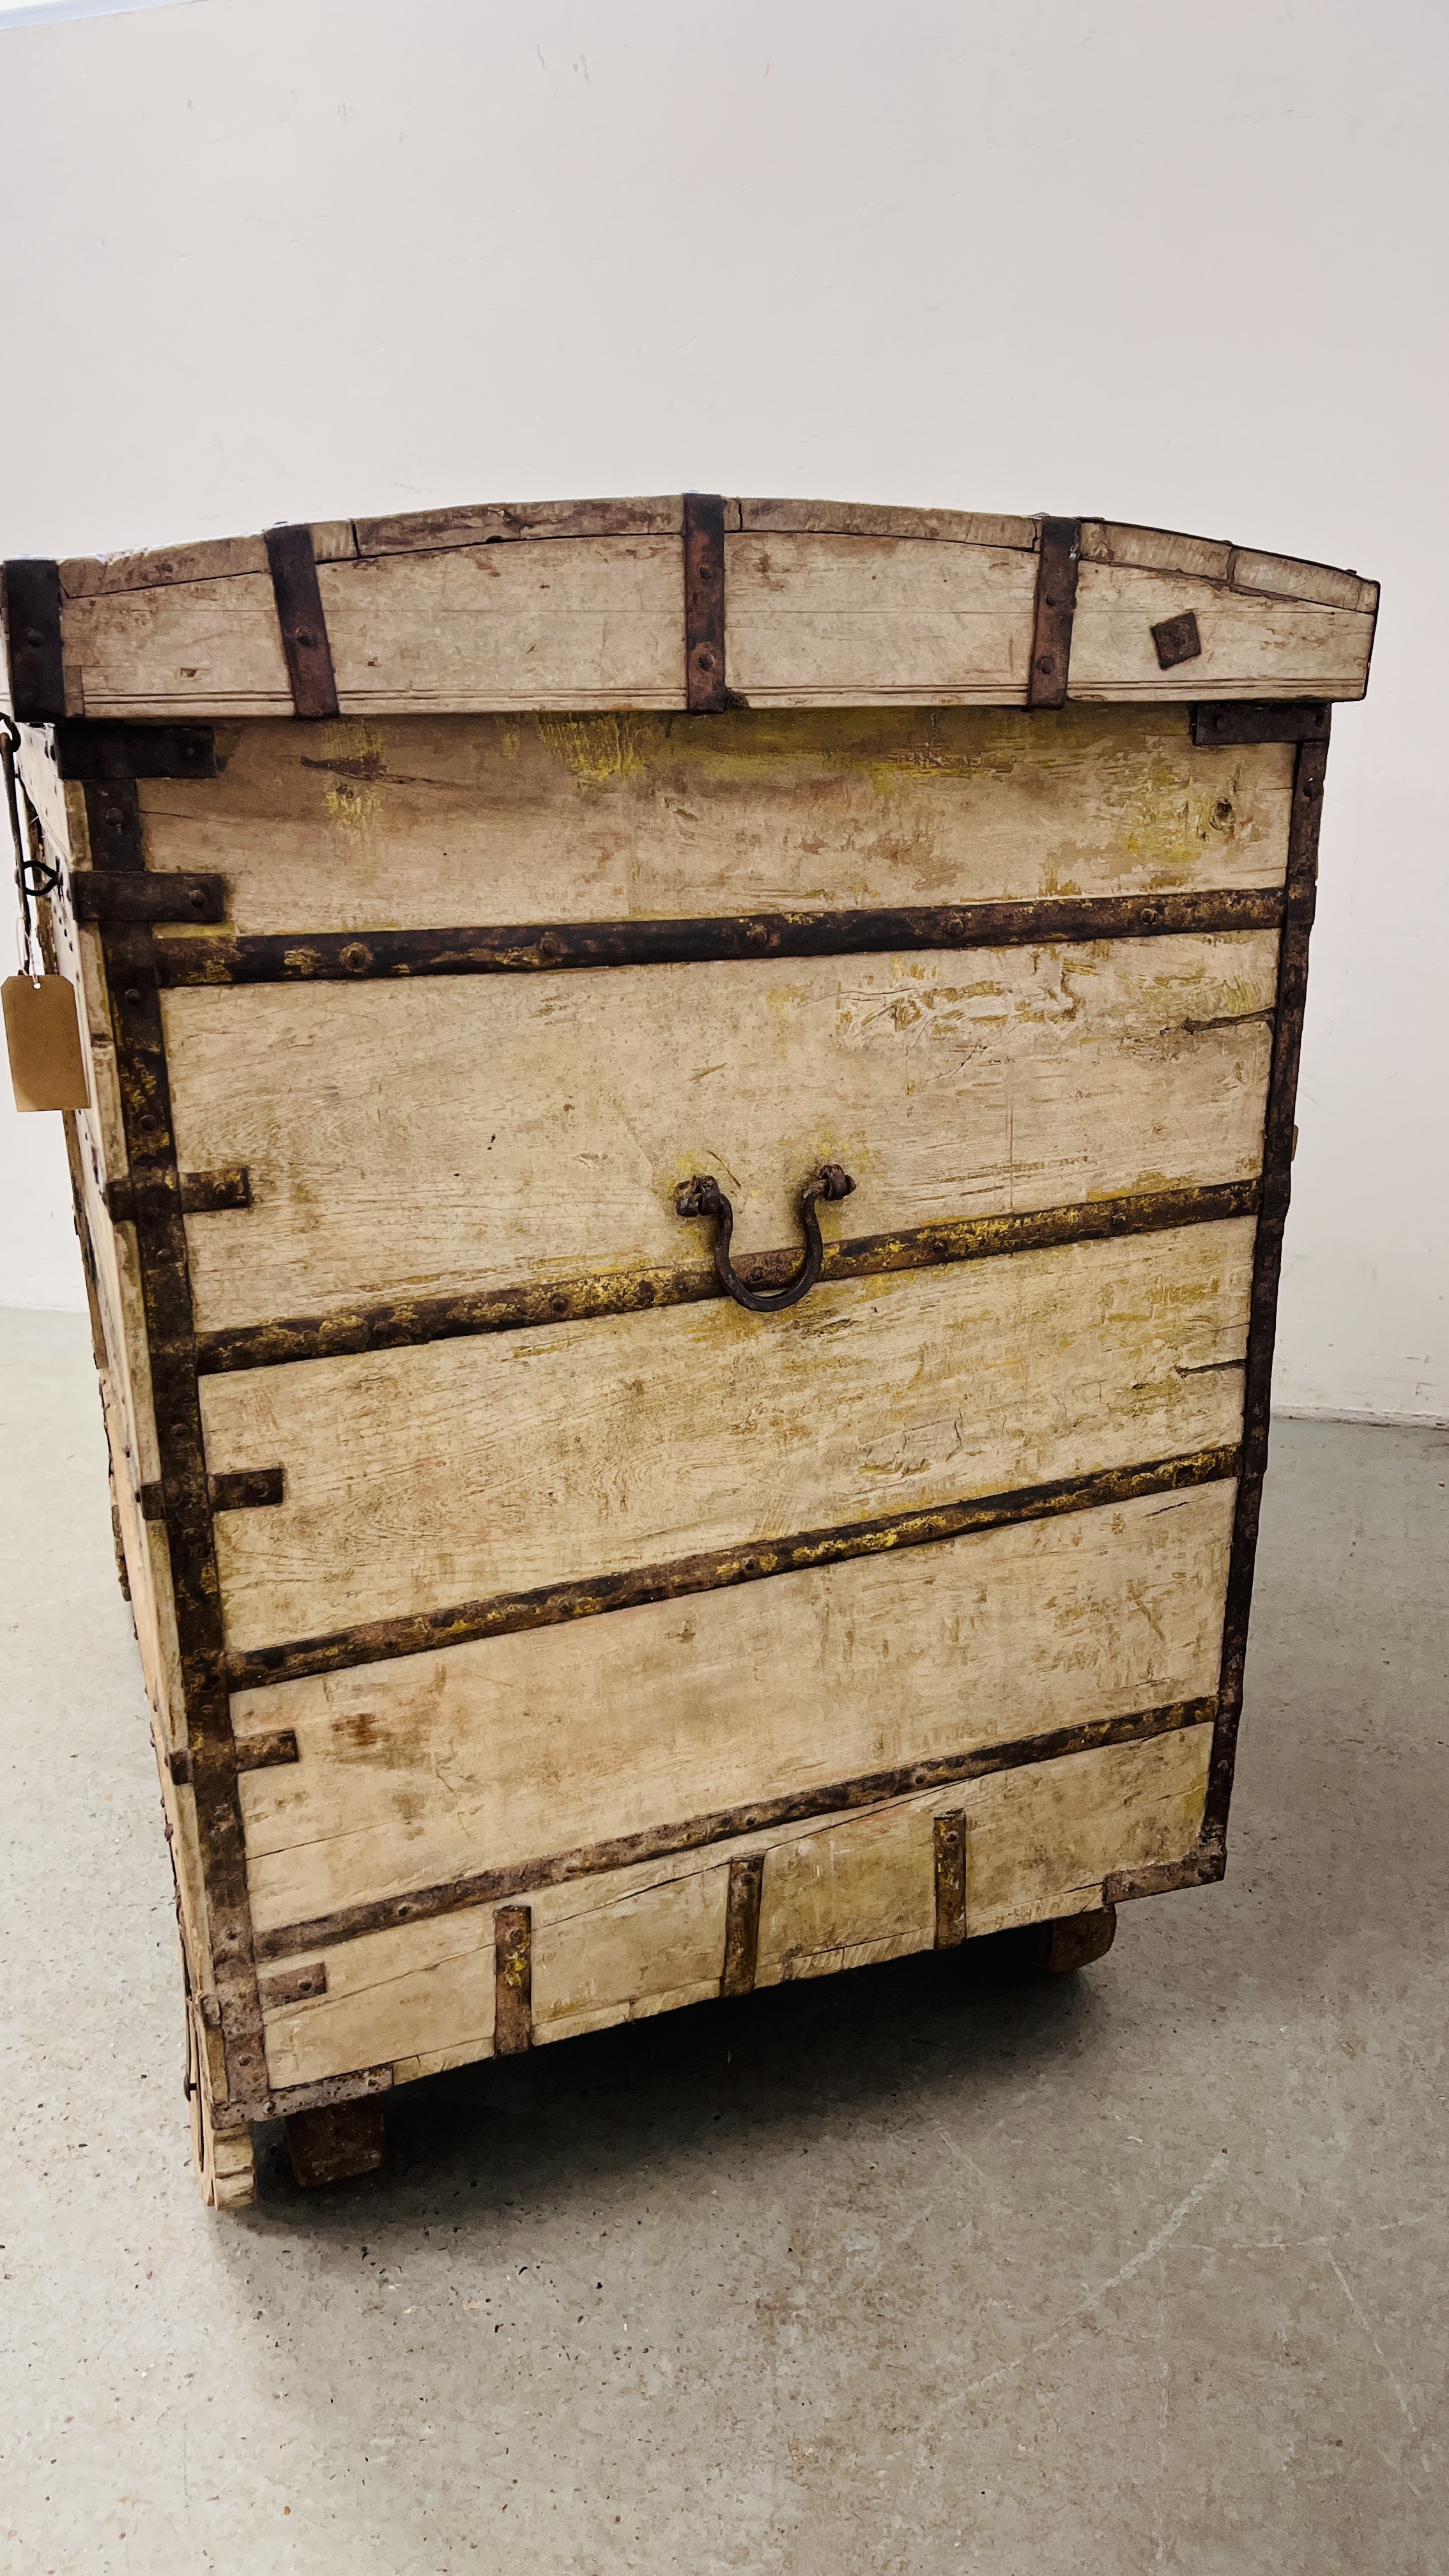 AN EXTREMELY LARGE RAJASTHANI 19th CENTURY DOWRY CHEST - 158CM W X 81CM D X 123CM H. - Image 15 of 30